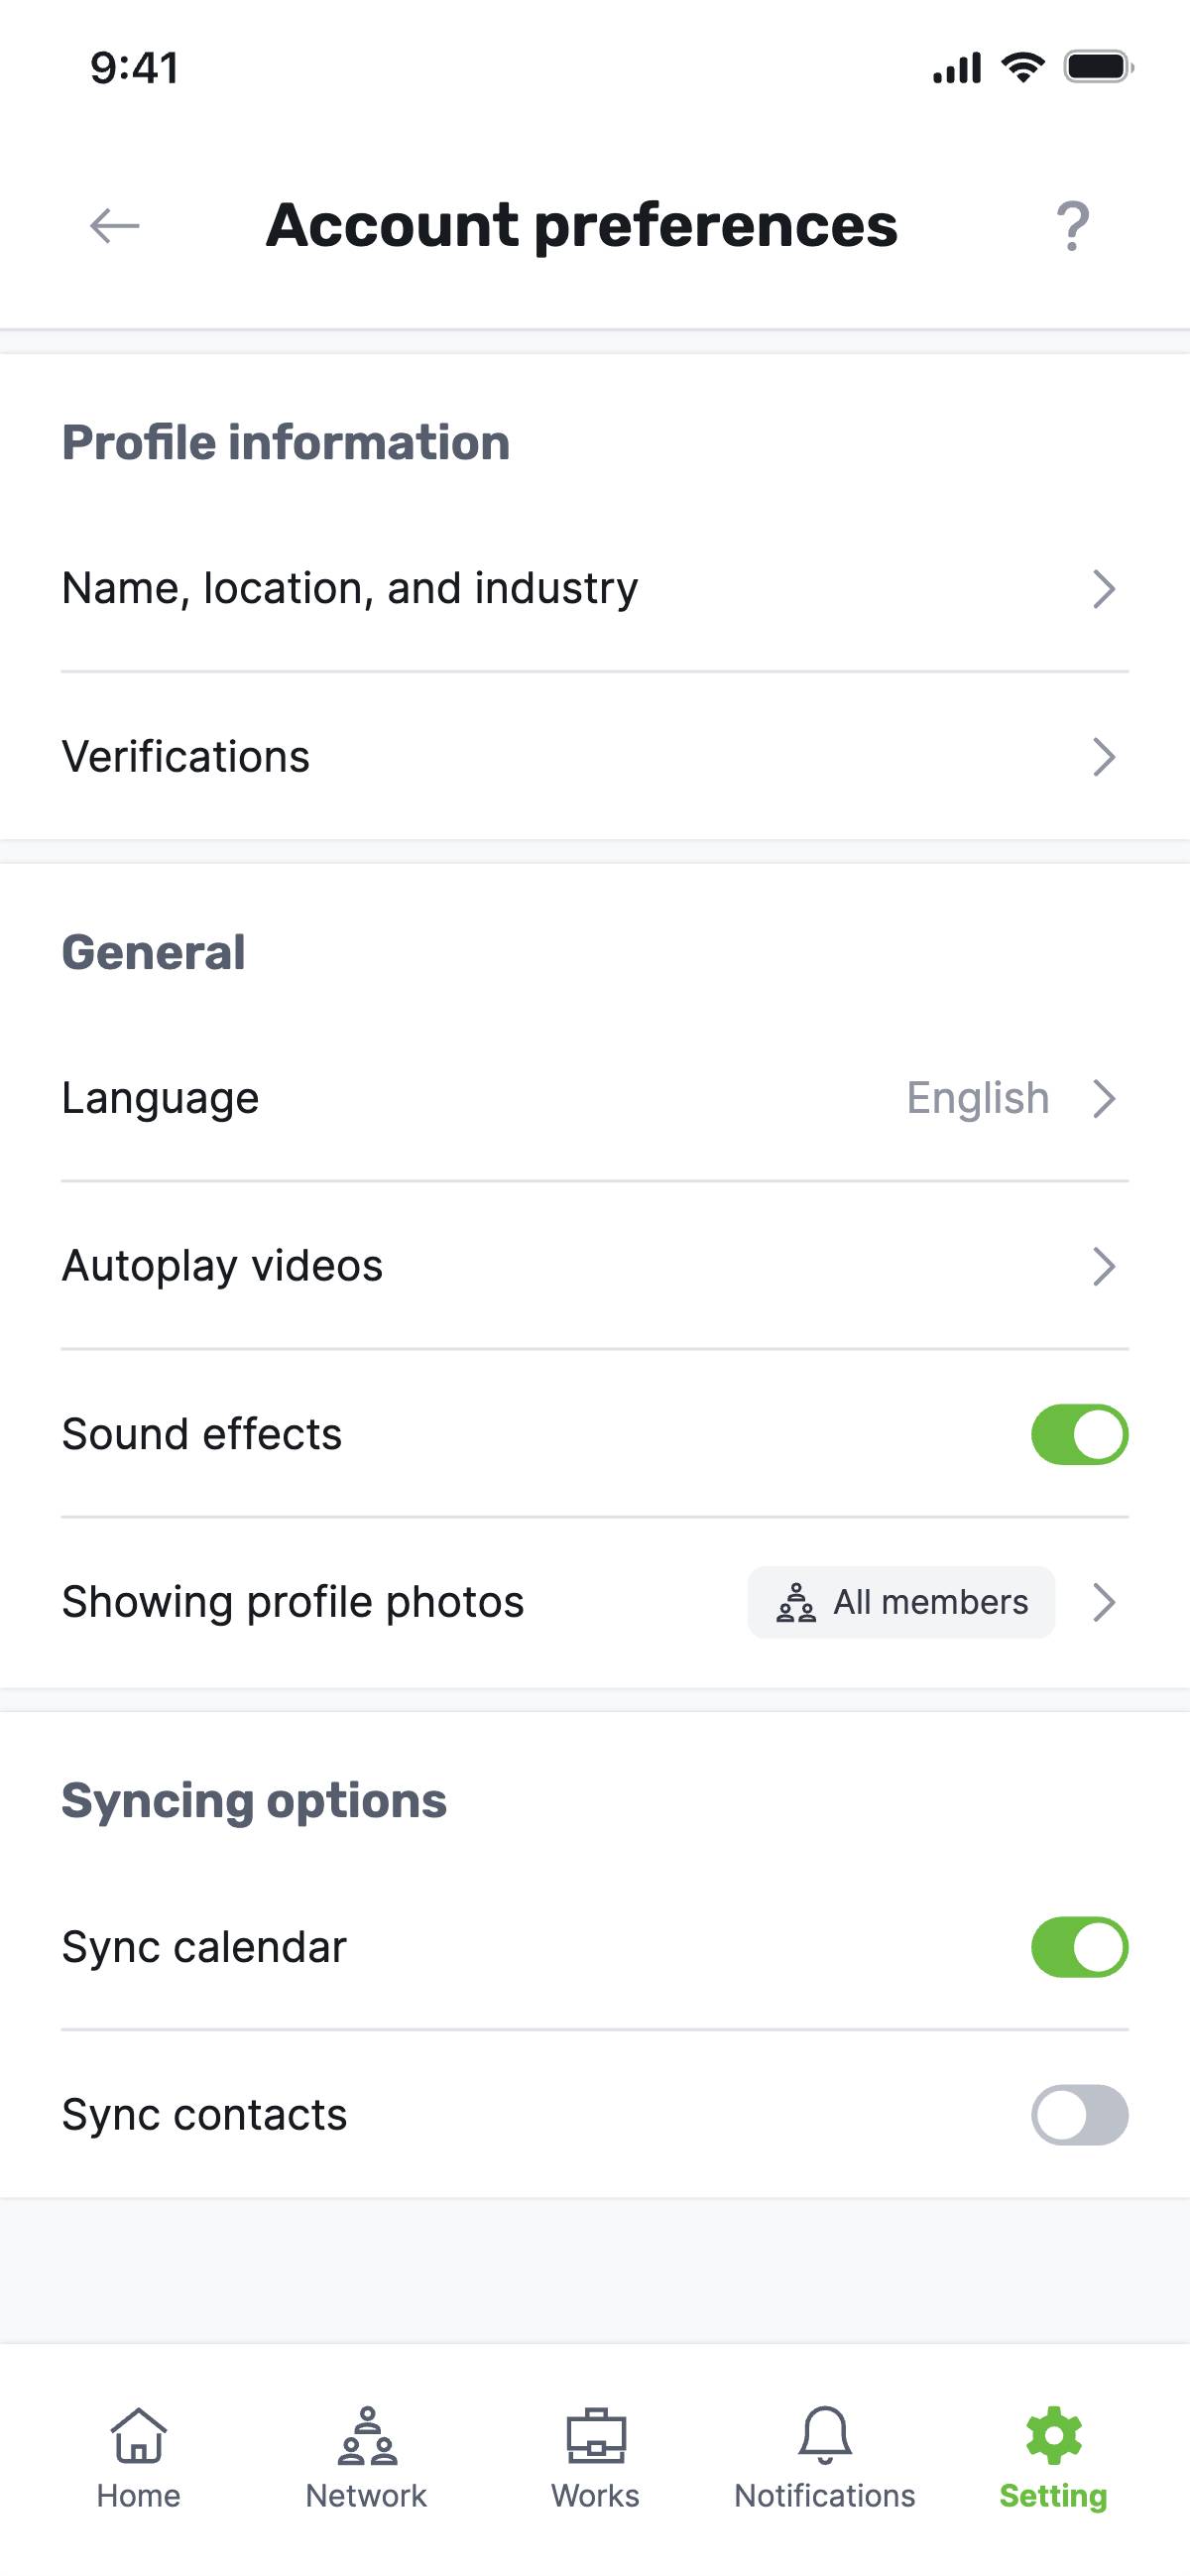 Settings - Account preferences